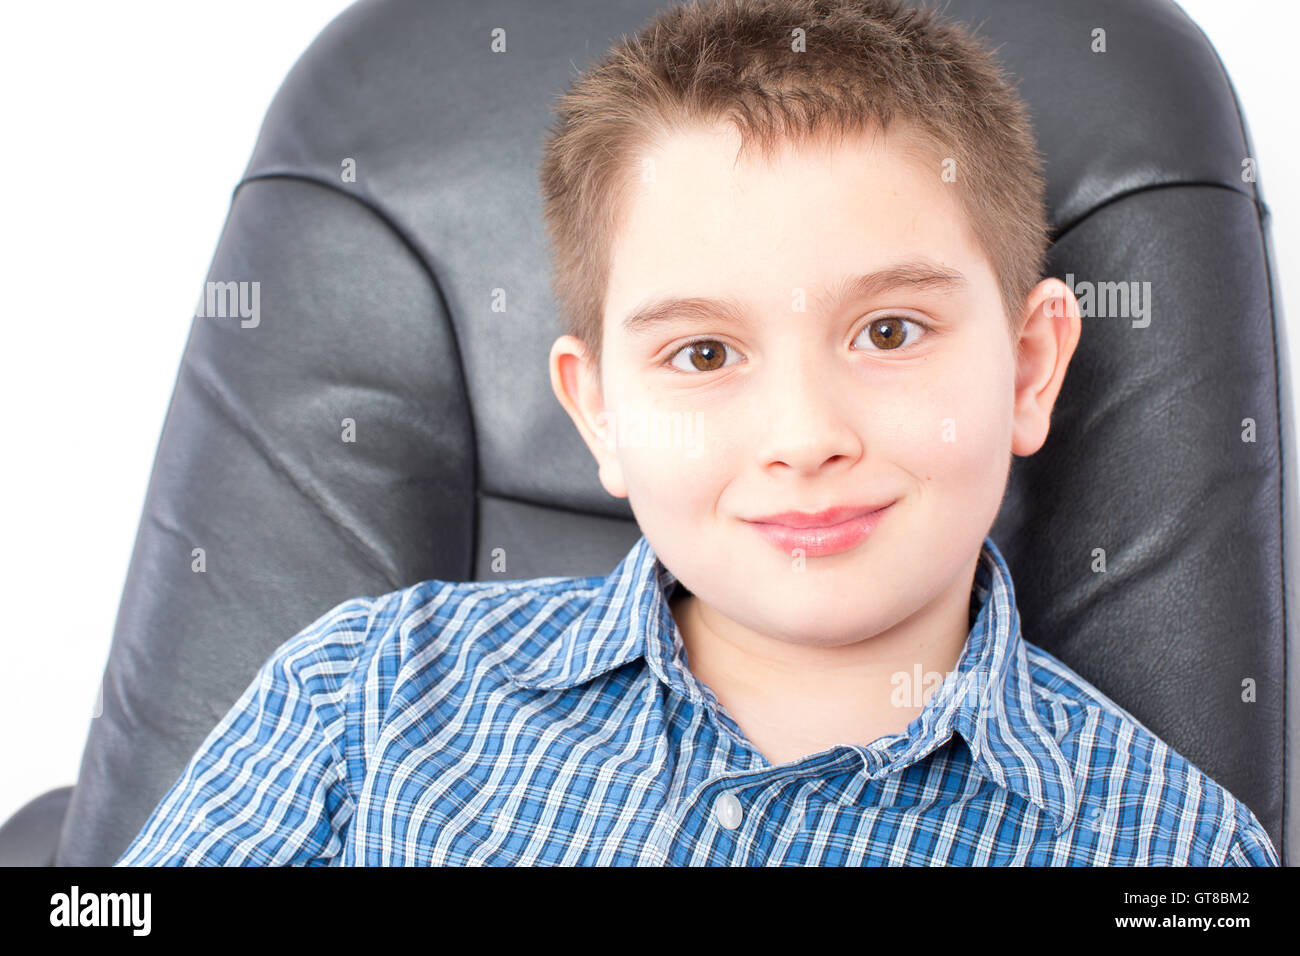 Close up Smiling Cute American Boy Sitting on a Black Office Chair, Looking at the Camera, on a White Background. Stock Photo